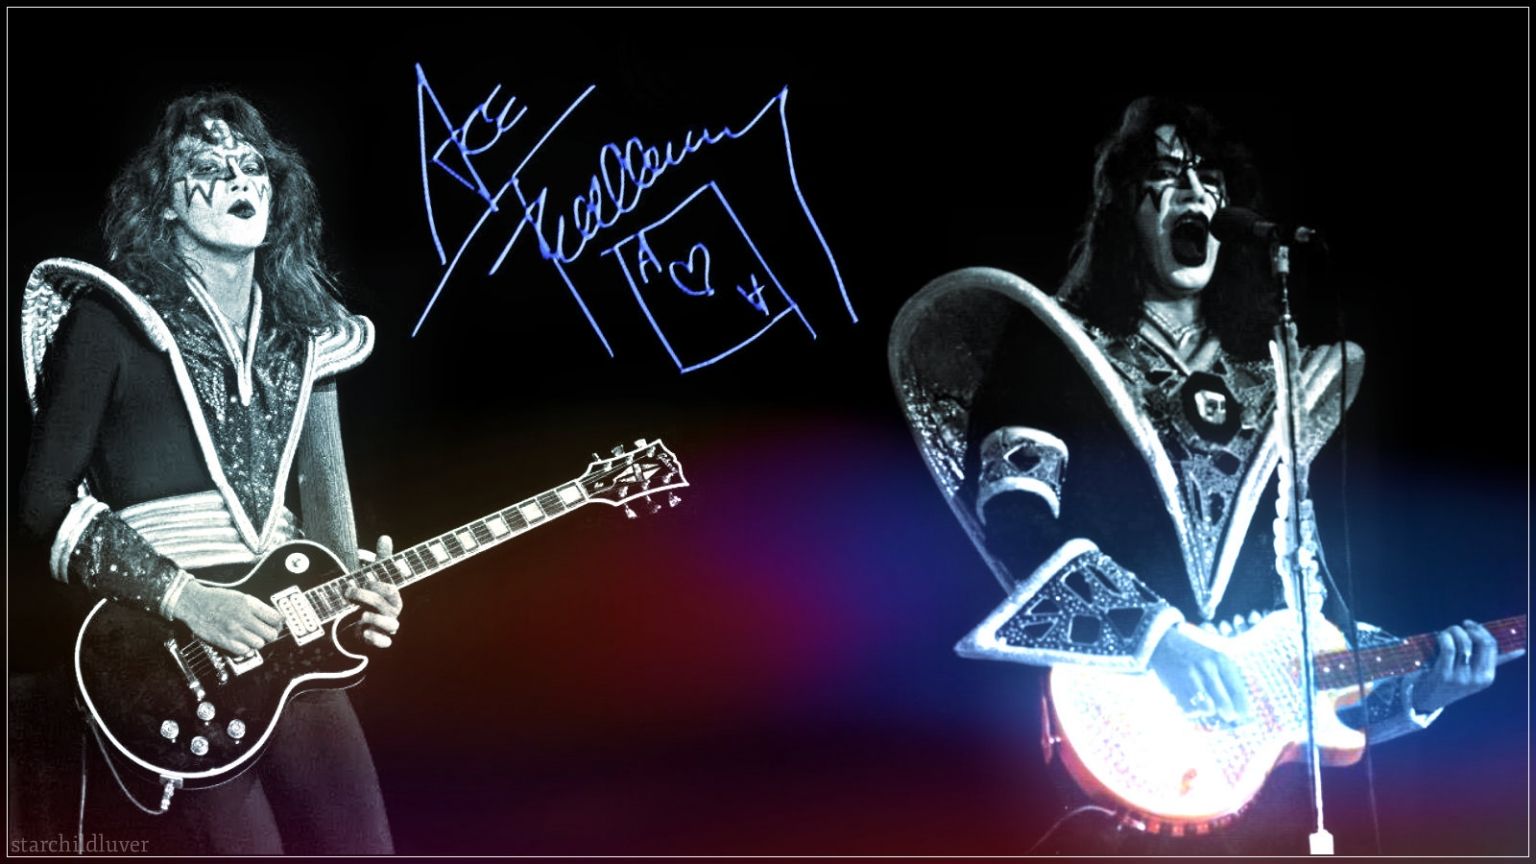 Free download KISS image Ace Frehley HD wallpapers and backgrounds photos 1...